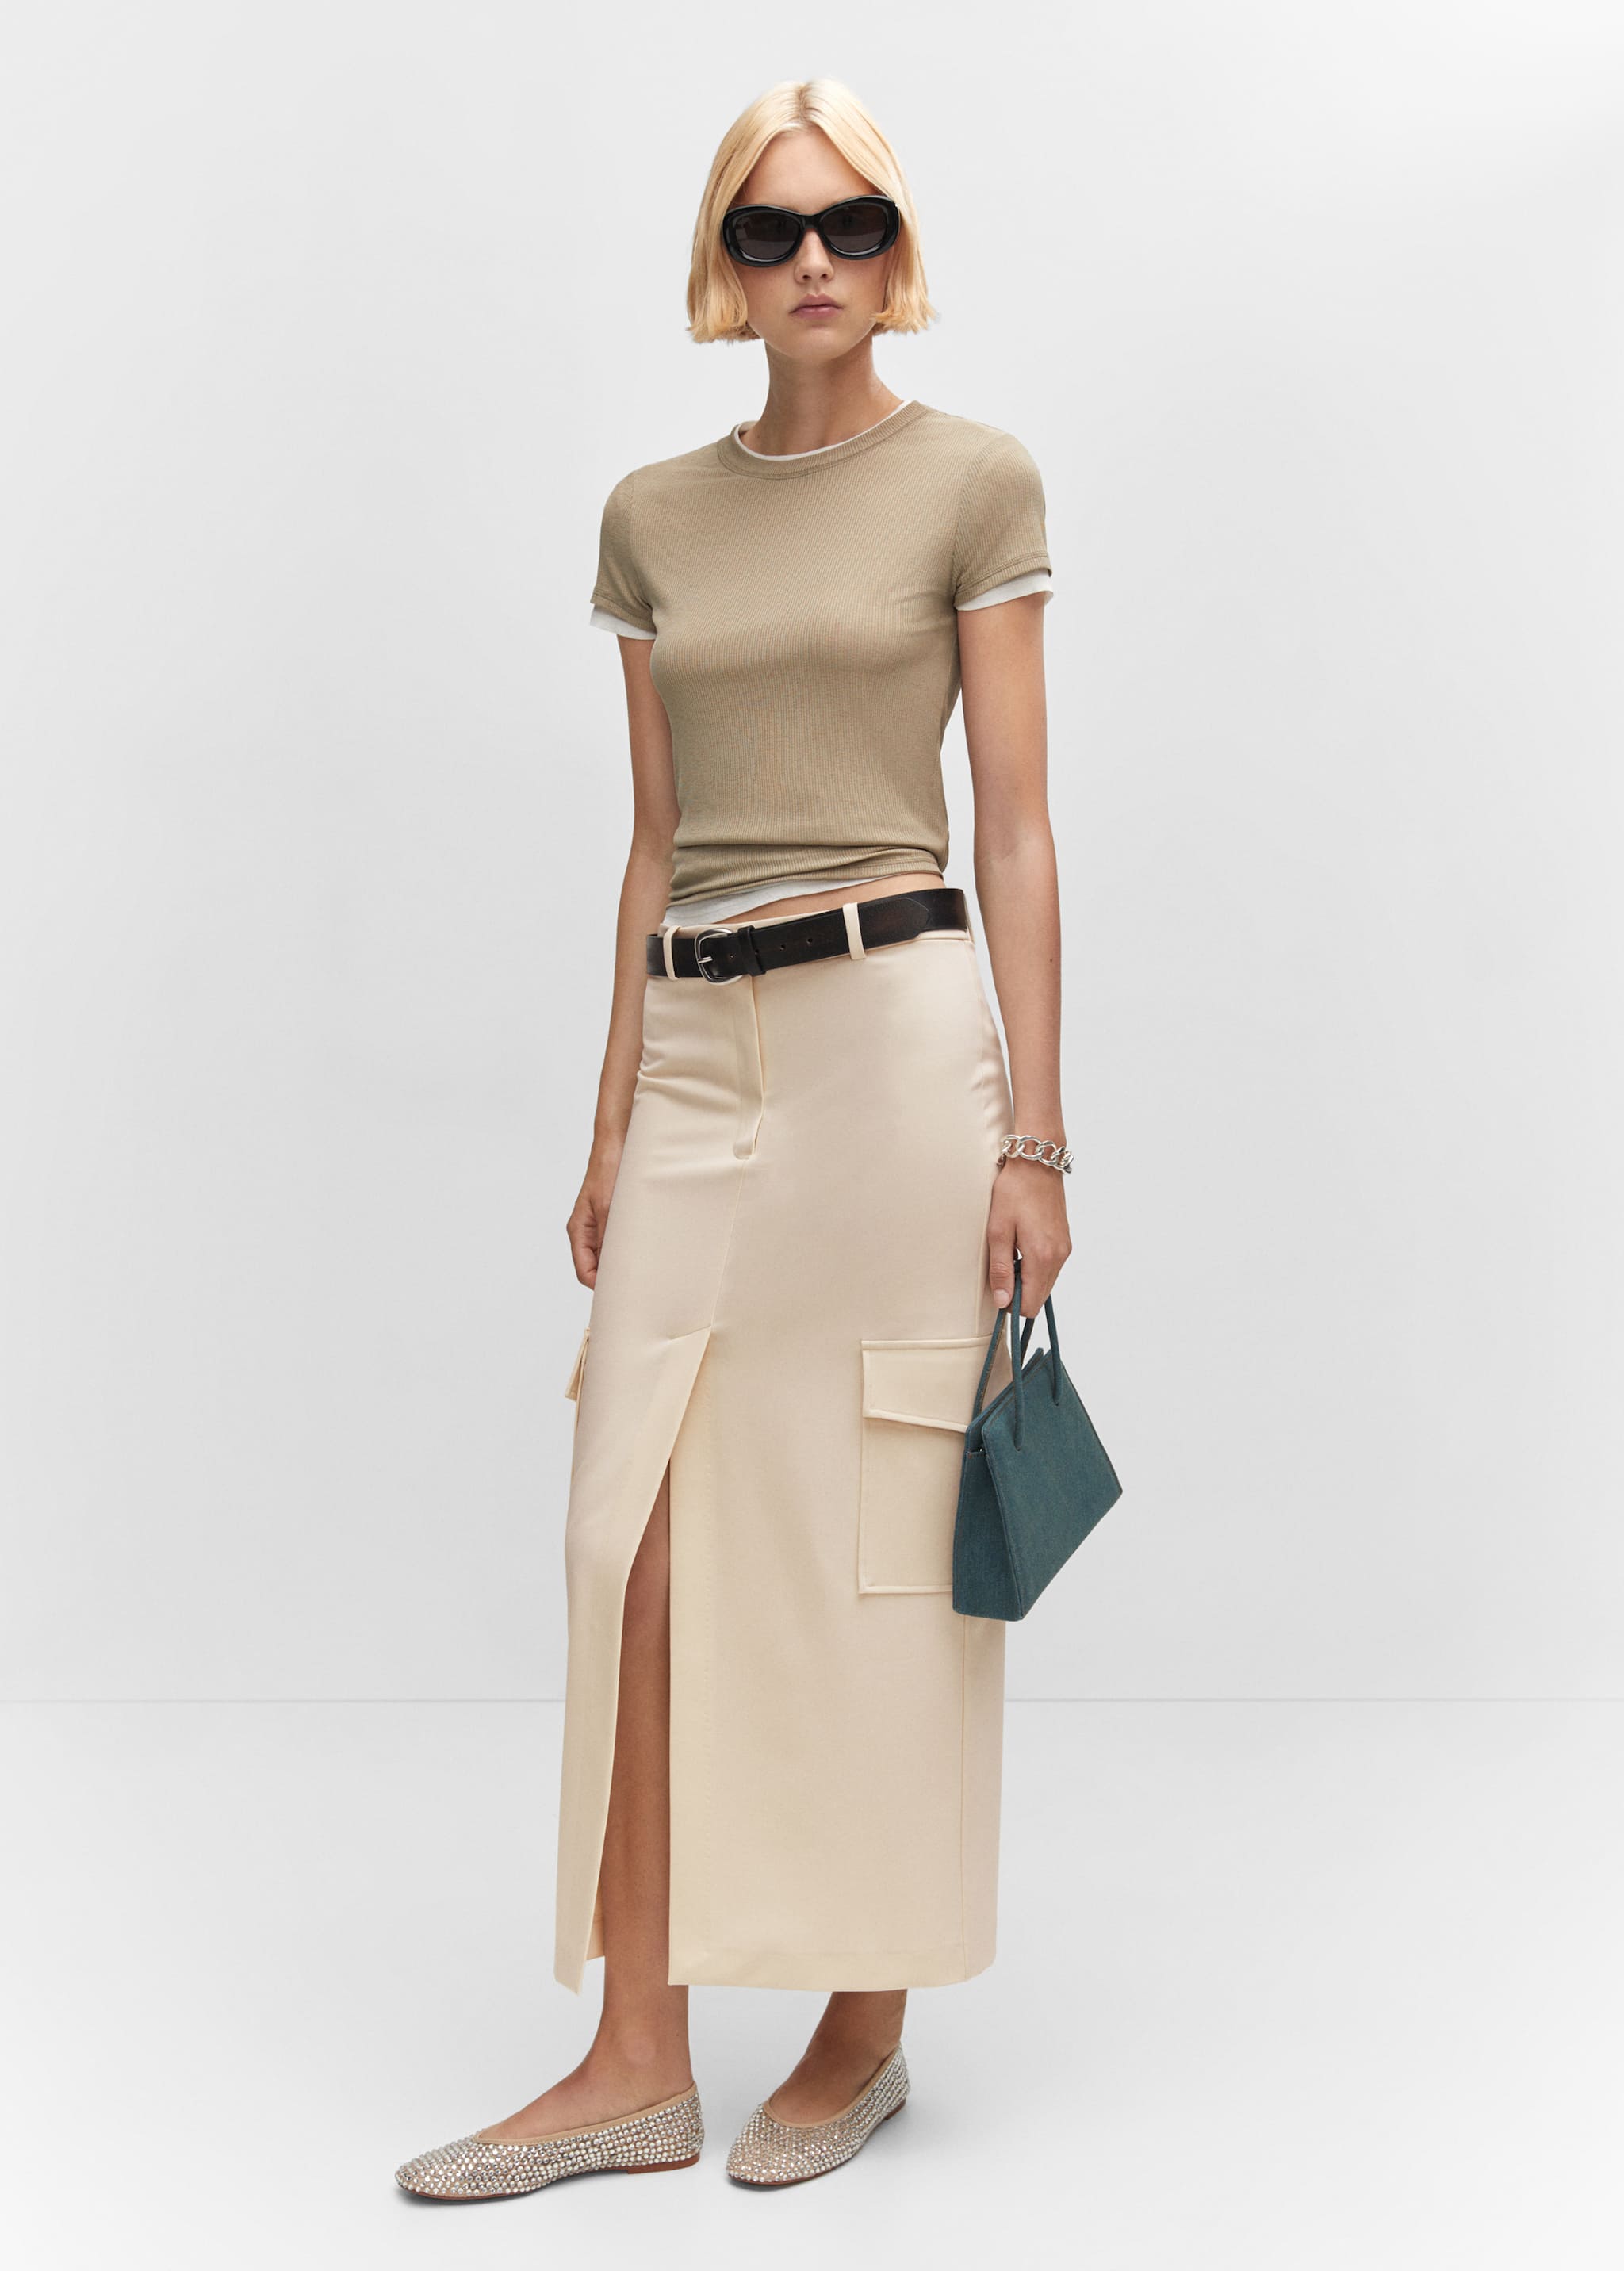 Cargo skirt with slit - General plane